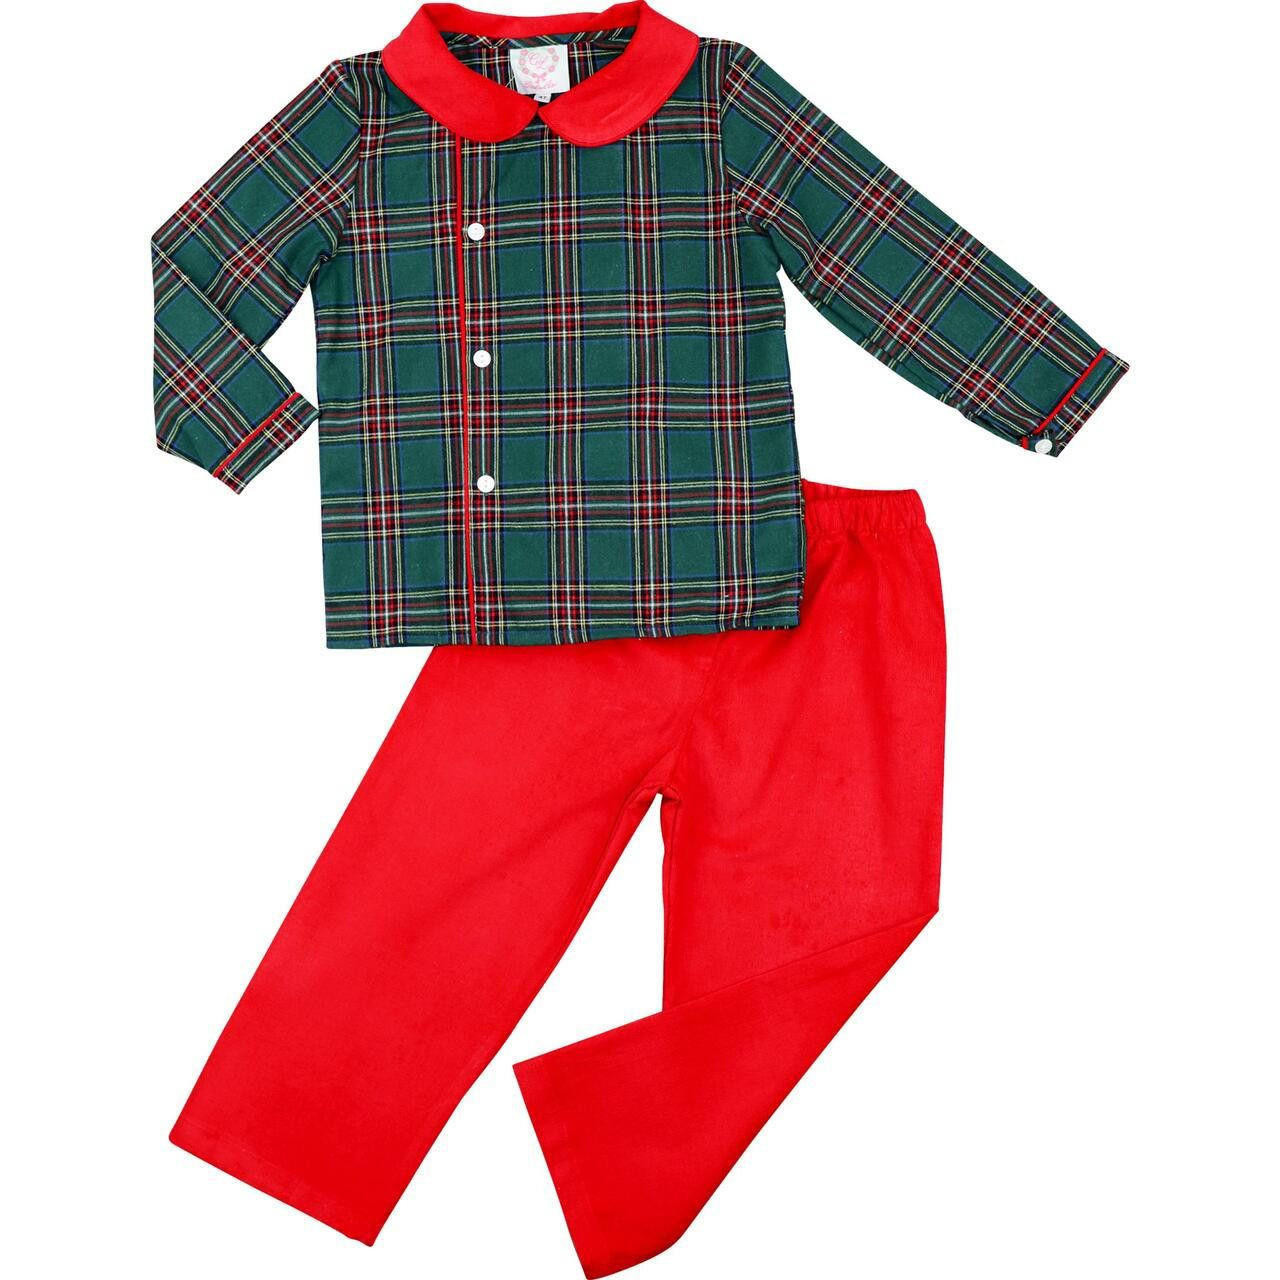 Men's Red Check Pajama Bottoms - Cecil and Lou